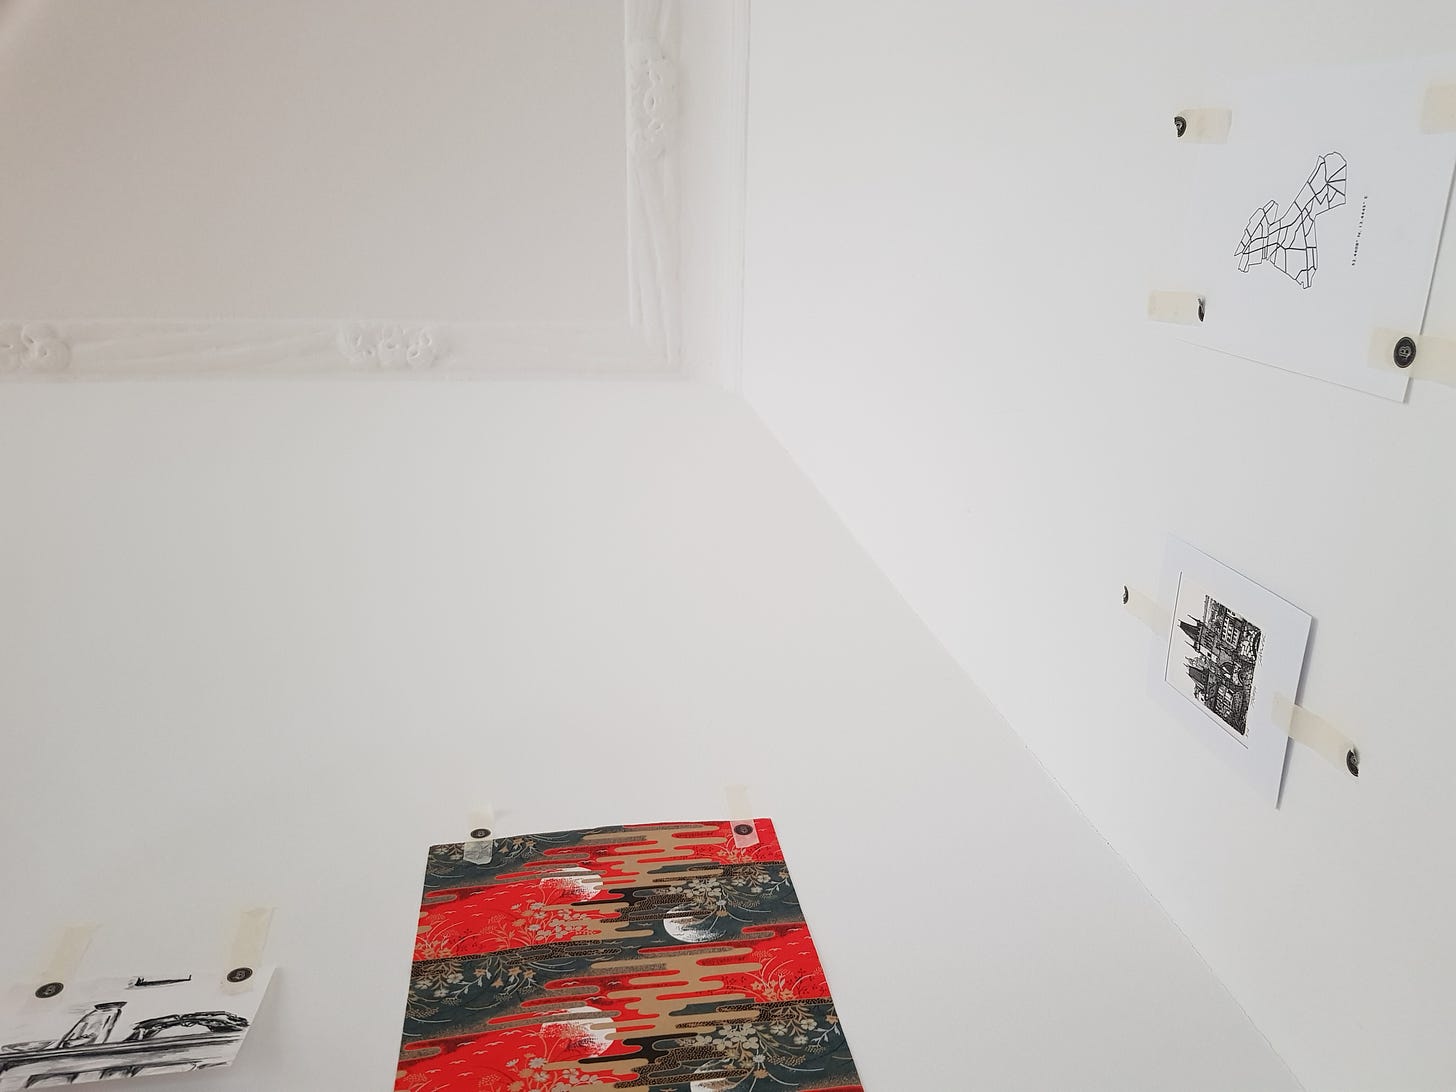 White walls and ceiling, with small pieces of artwork in black, white, and red.